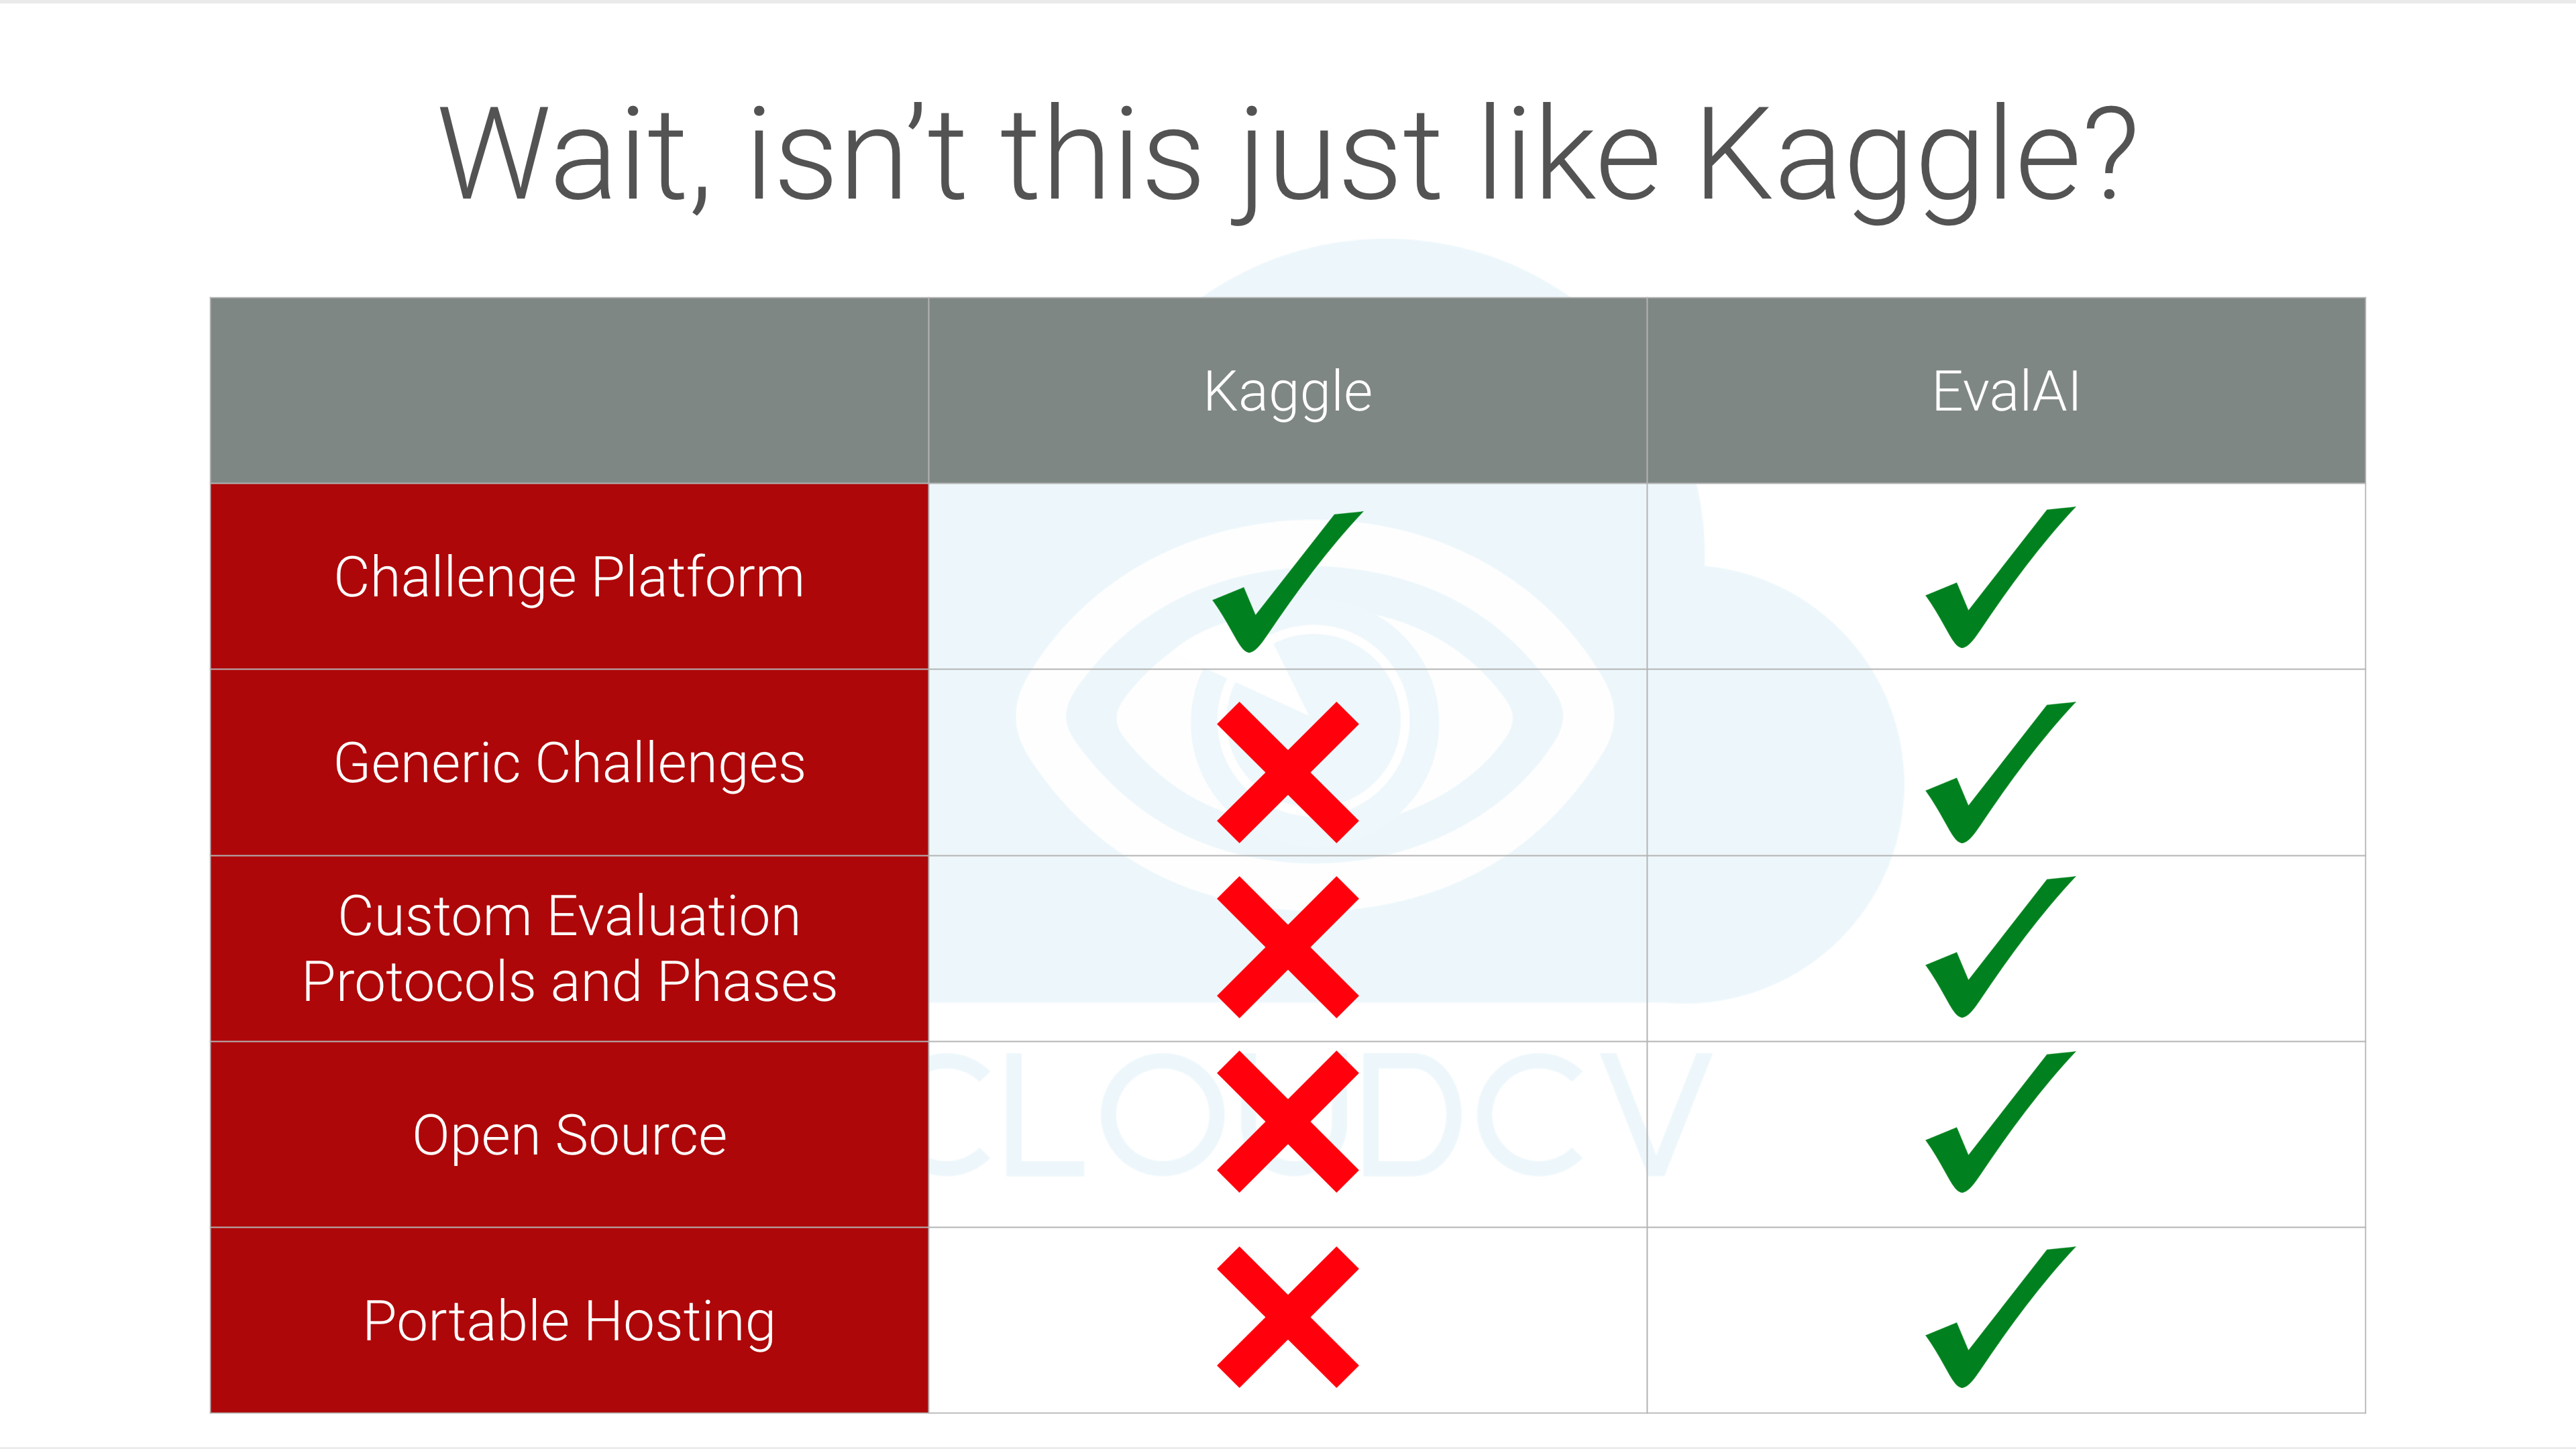 kaggle_comparison.png